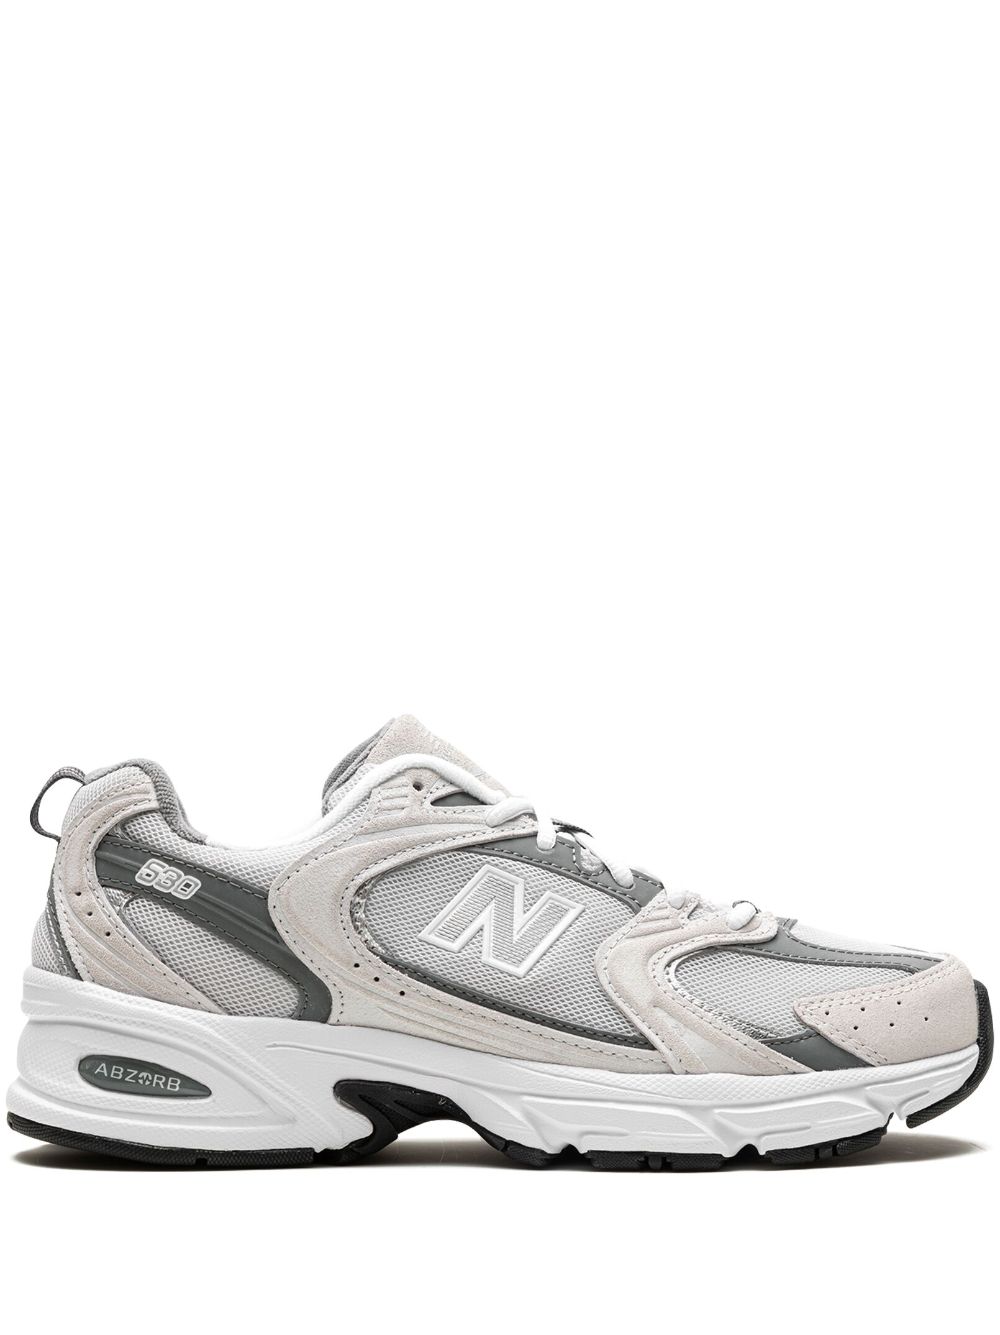 New Balance 530 low-top sneakers - White